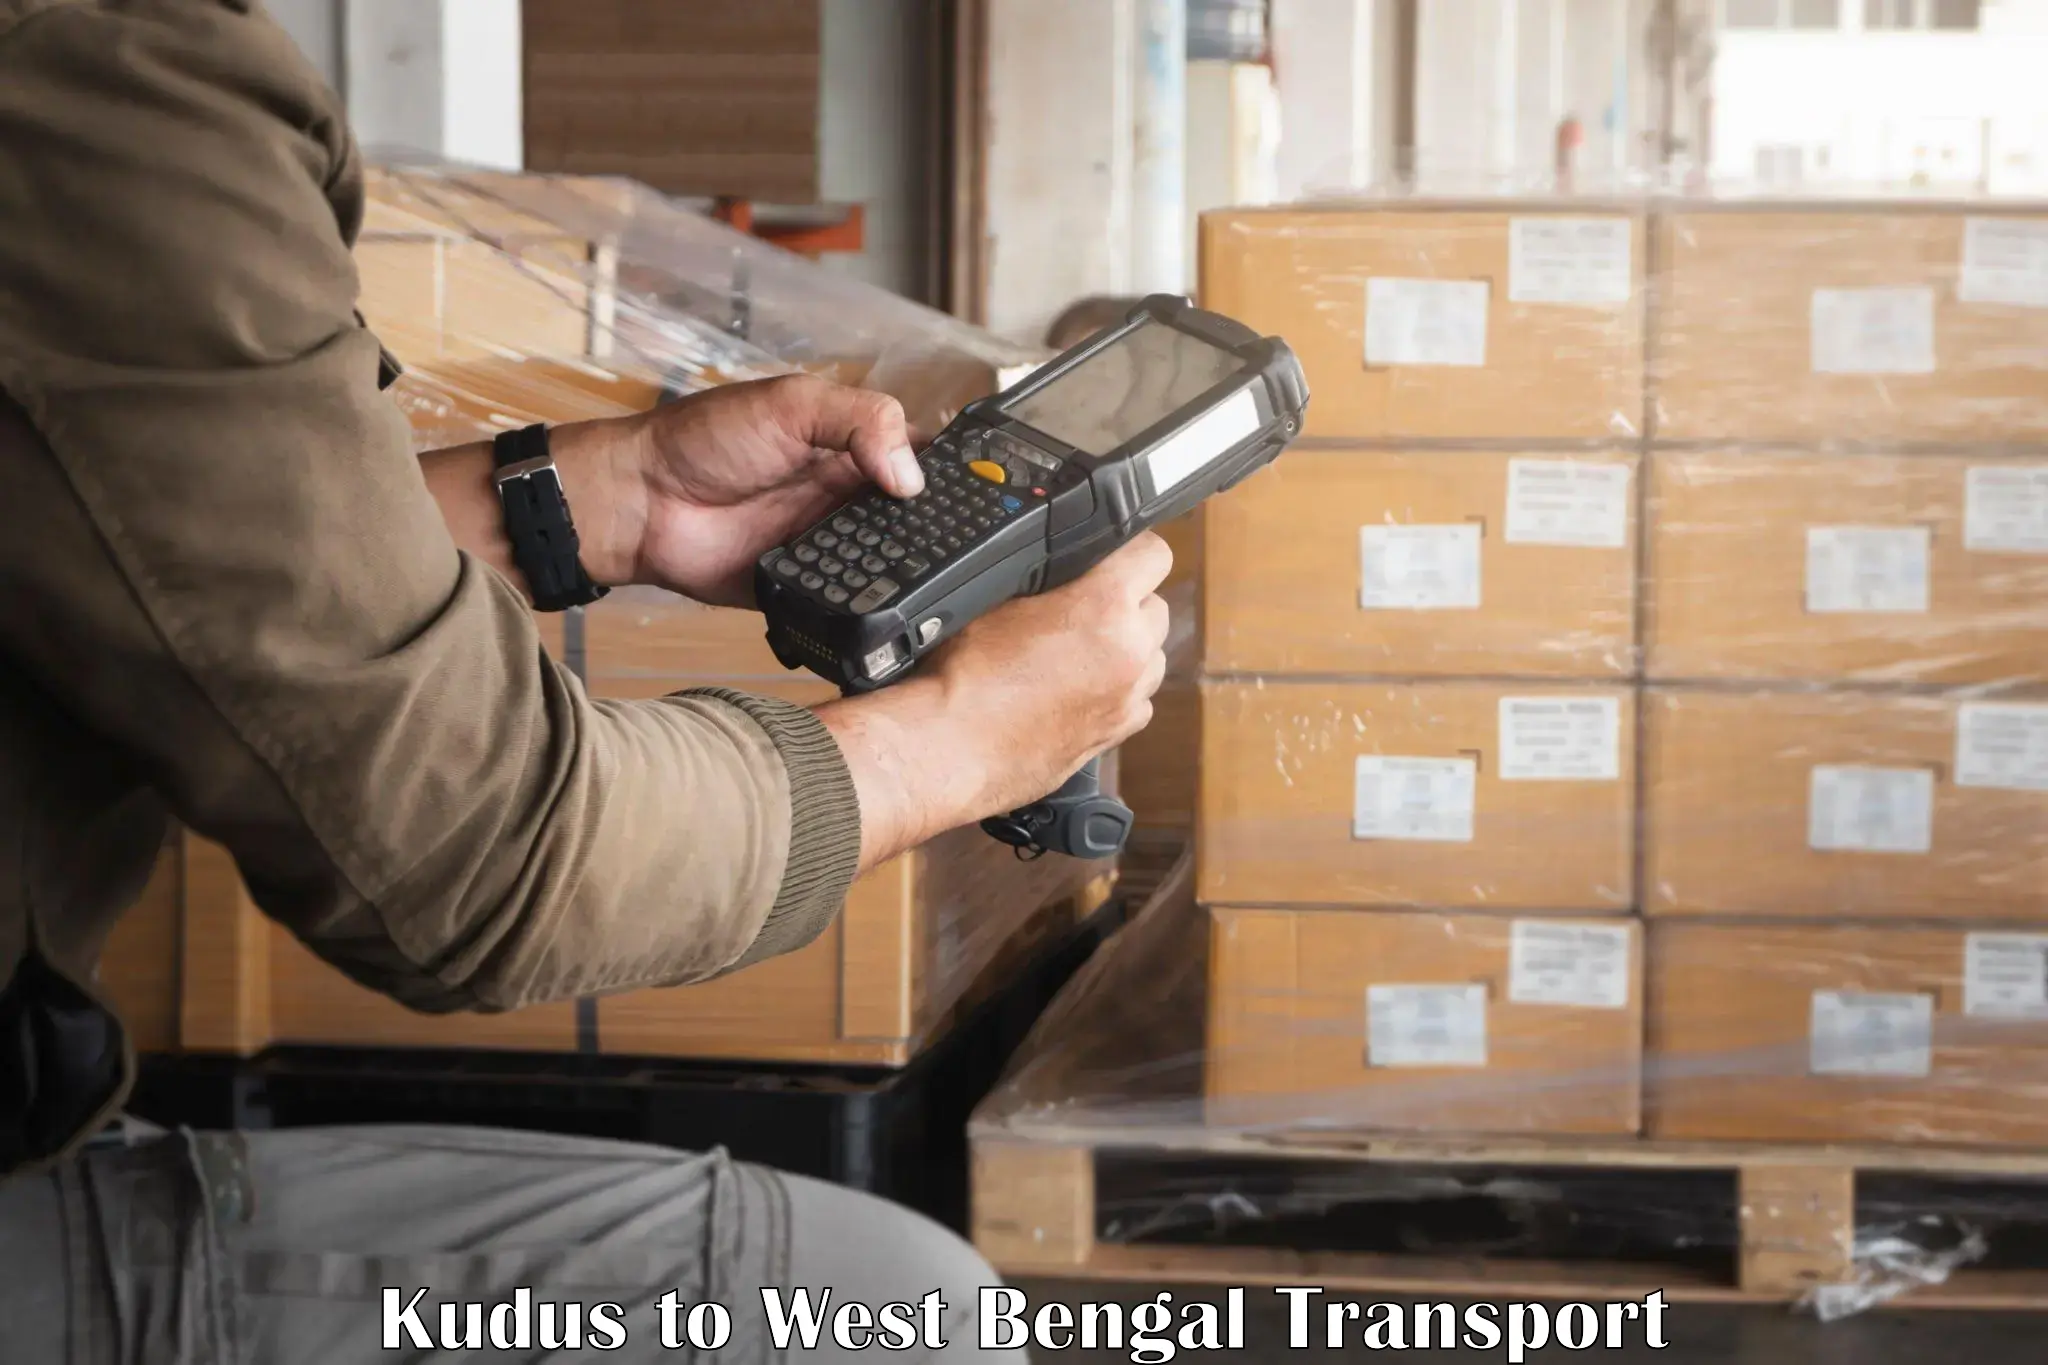 Truck transport companies in India Kudus to West Bengal